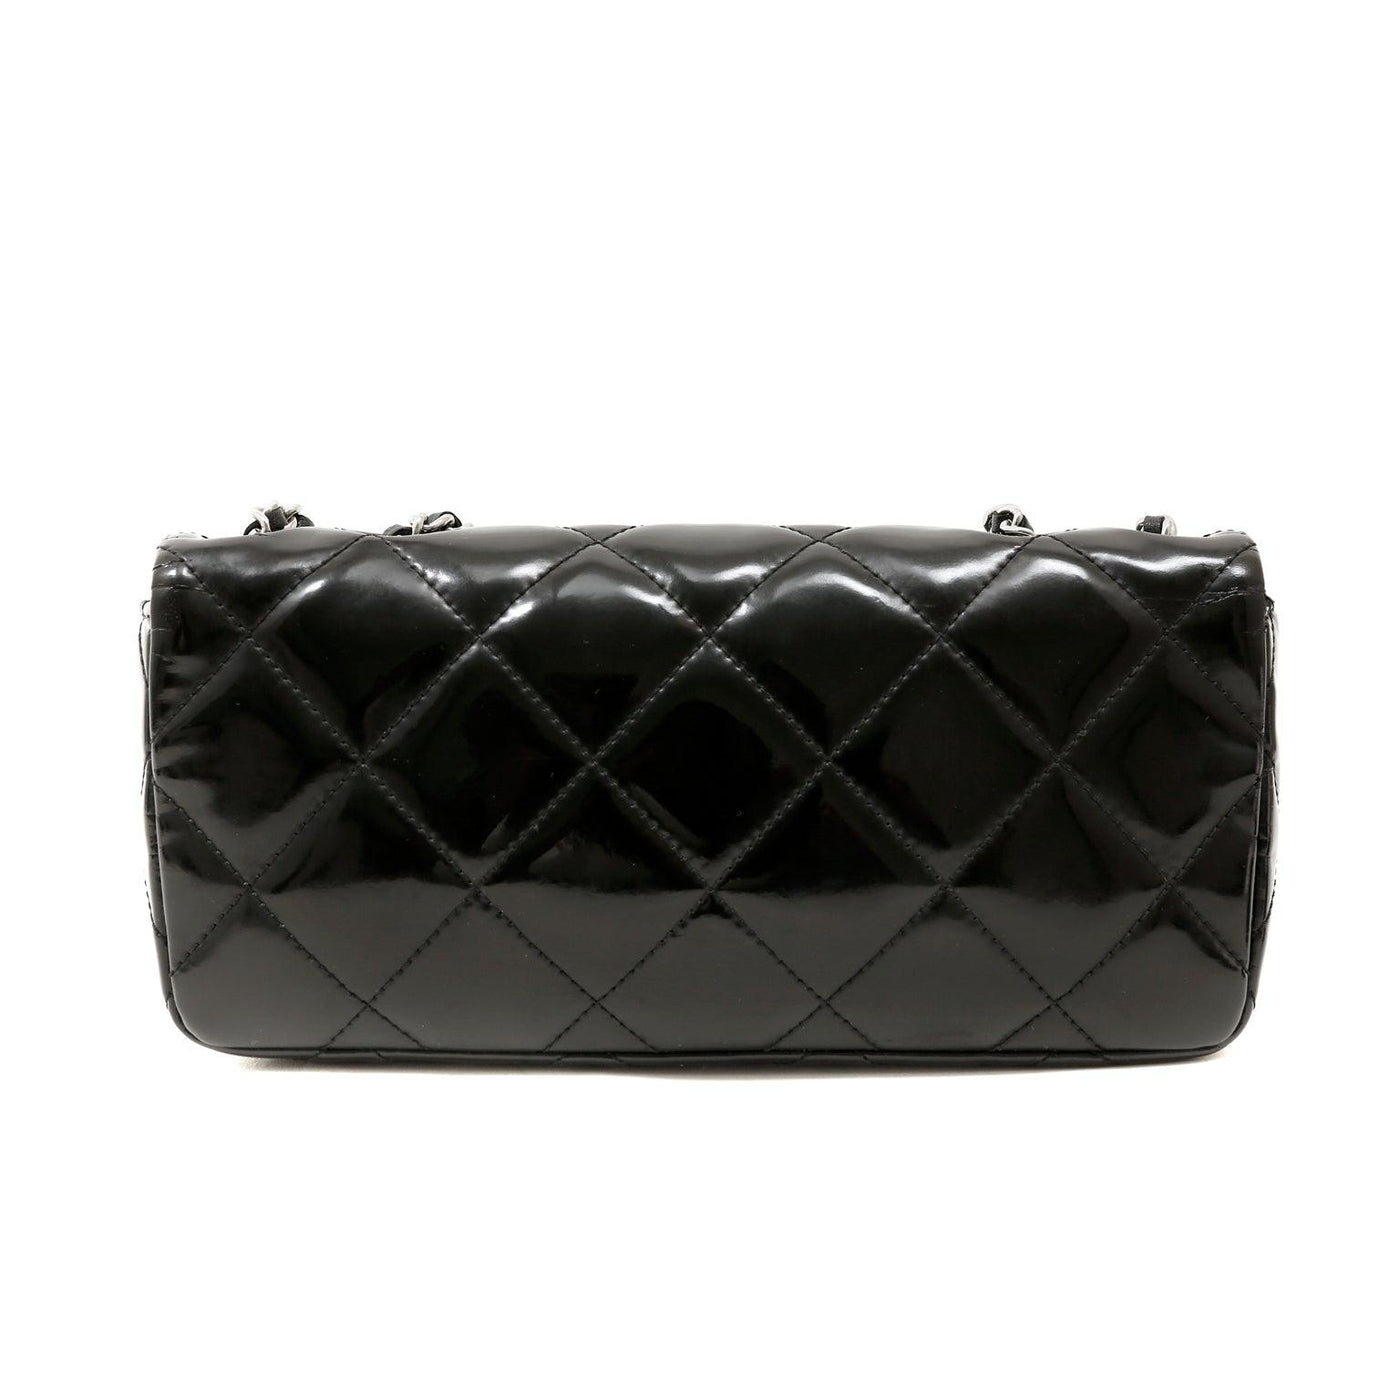 chanel patent leather purse